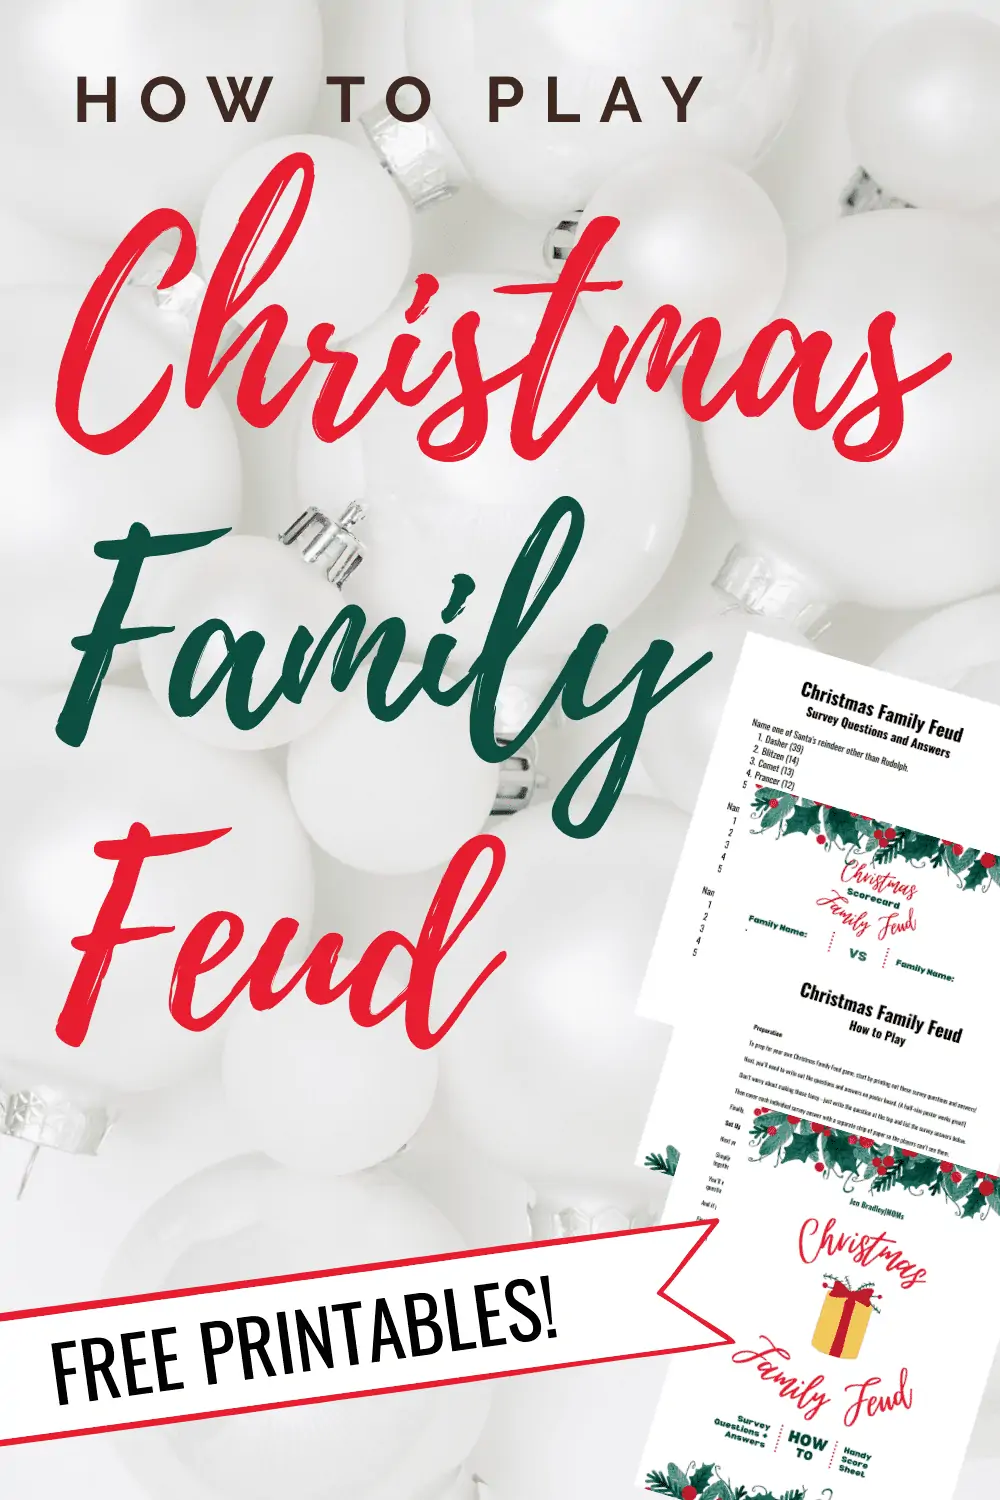 Fun Christmas Family Feud Game for the Whole Family